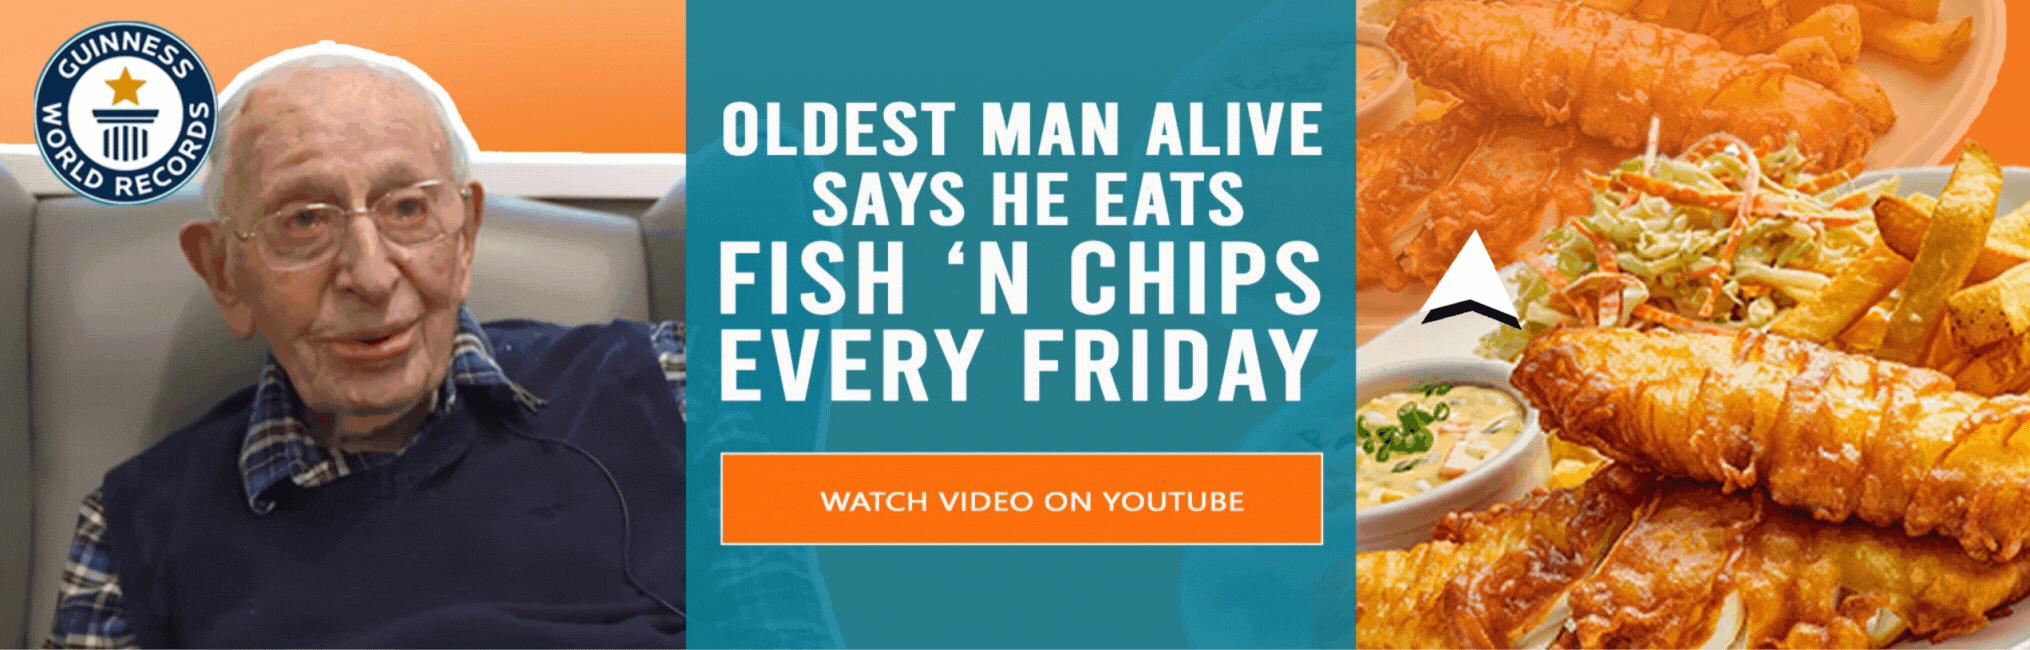 Oldest man alive (111) says he eats fish n chips every friday - Watch the video on Youtube!